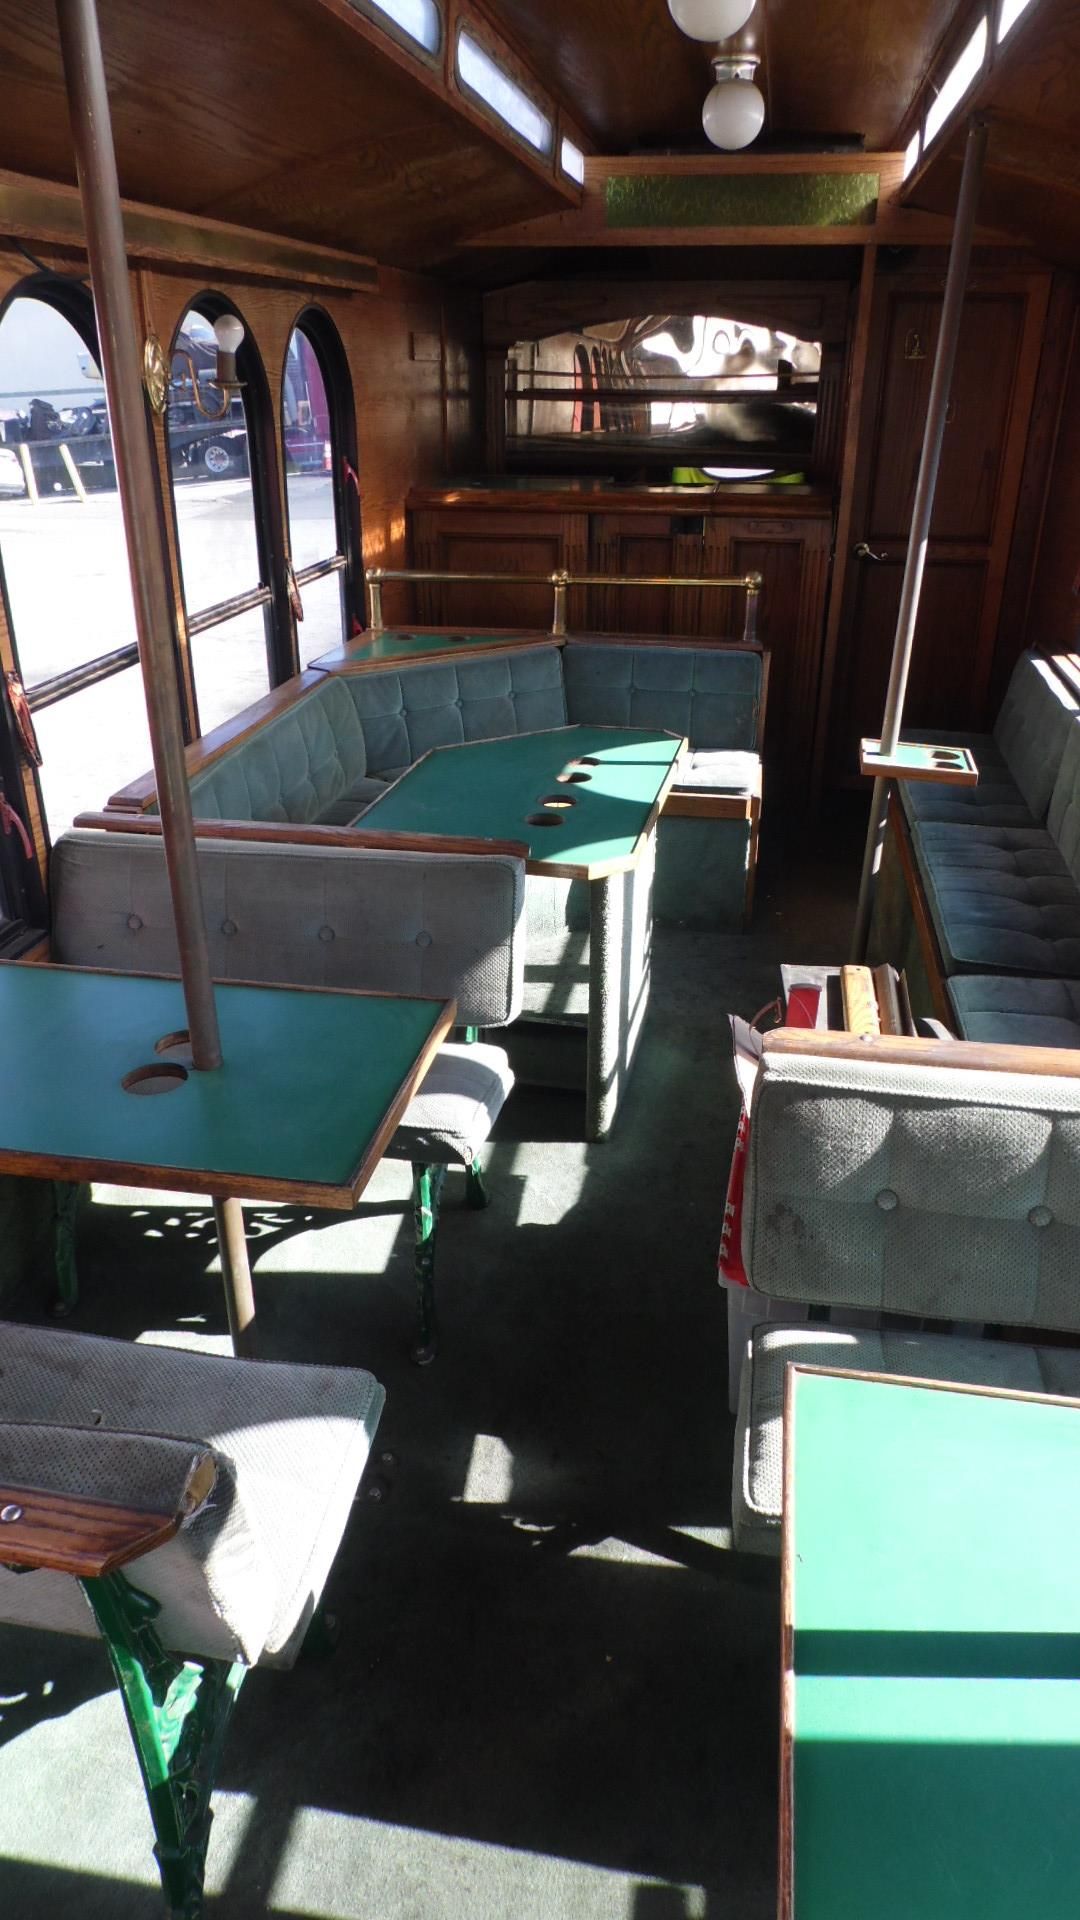 27FT. "PARTY TROLLEY" - W/ LOUNGE SEATING / BAR / BATHROOM (NEEDS WORK INFO. UPON REQUEST) - Image 7 of 13